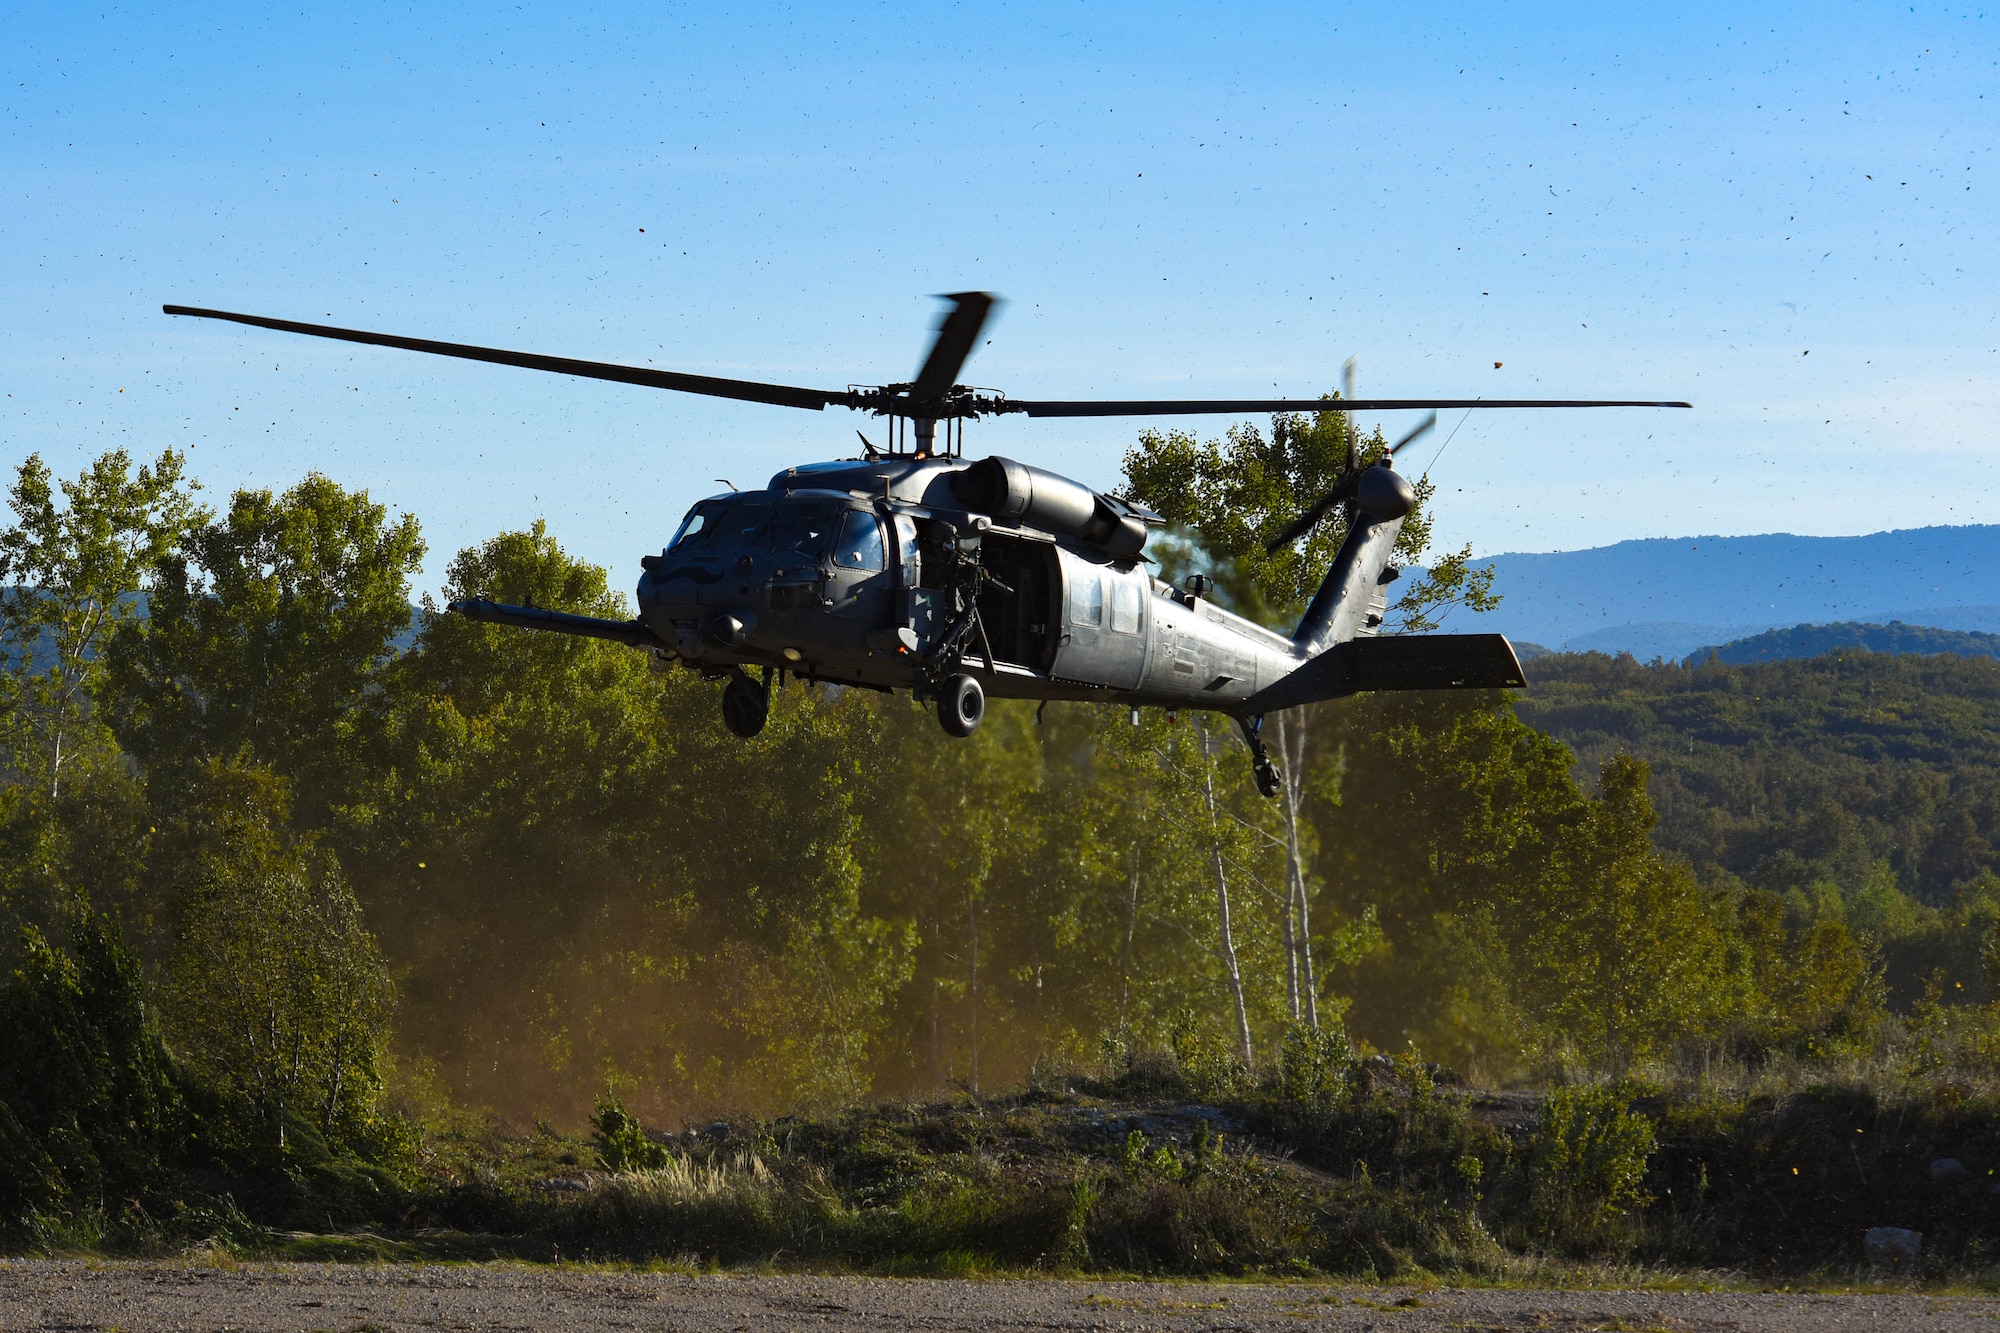 U.S. Air Force HH-60G Pave Hawk A6212 lands in Croatia during its final sortie Sept. 23, 2021. A6212 was stationed at Naval Air Station Keflavik from 1992-2006, Royal Air Force Lakenheath from 2006-2018 and Aviano Air Base from 2018 to present. (U.S. Air Force photo by Senior Airman Brooke Moeder)